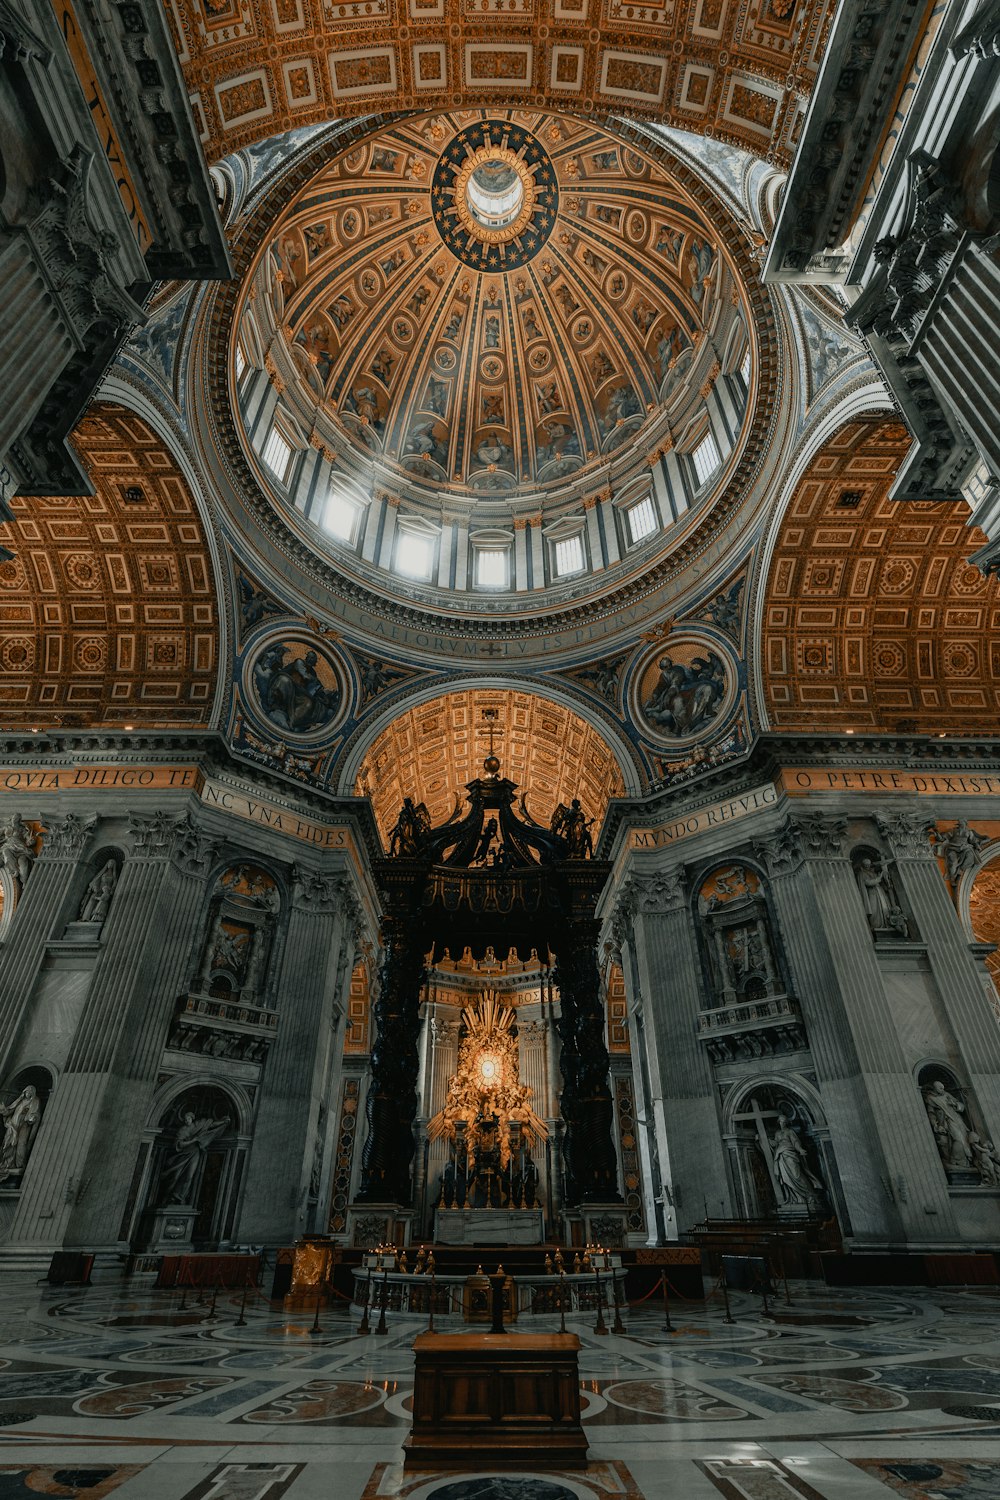 St Peters Basilica Pictures Download Free Images On Unsplash